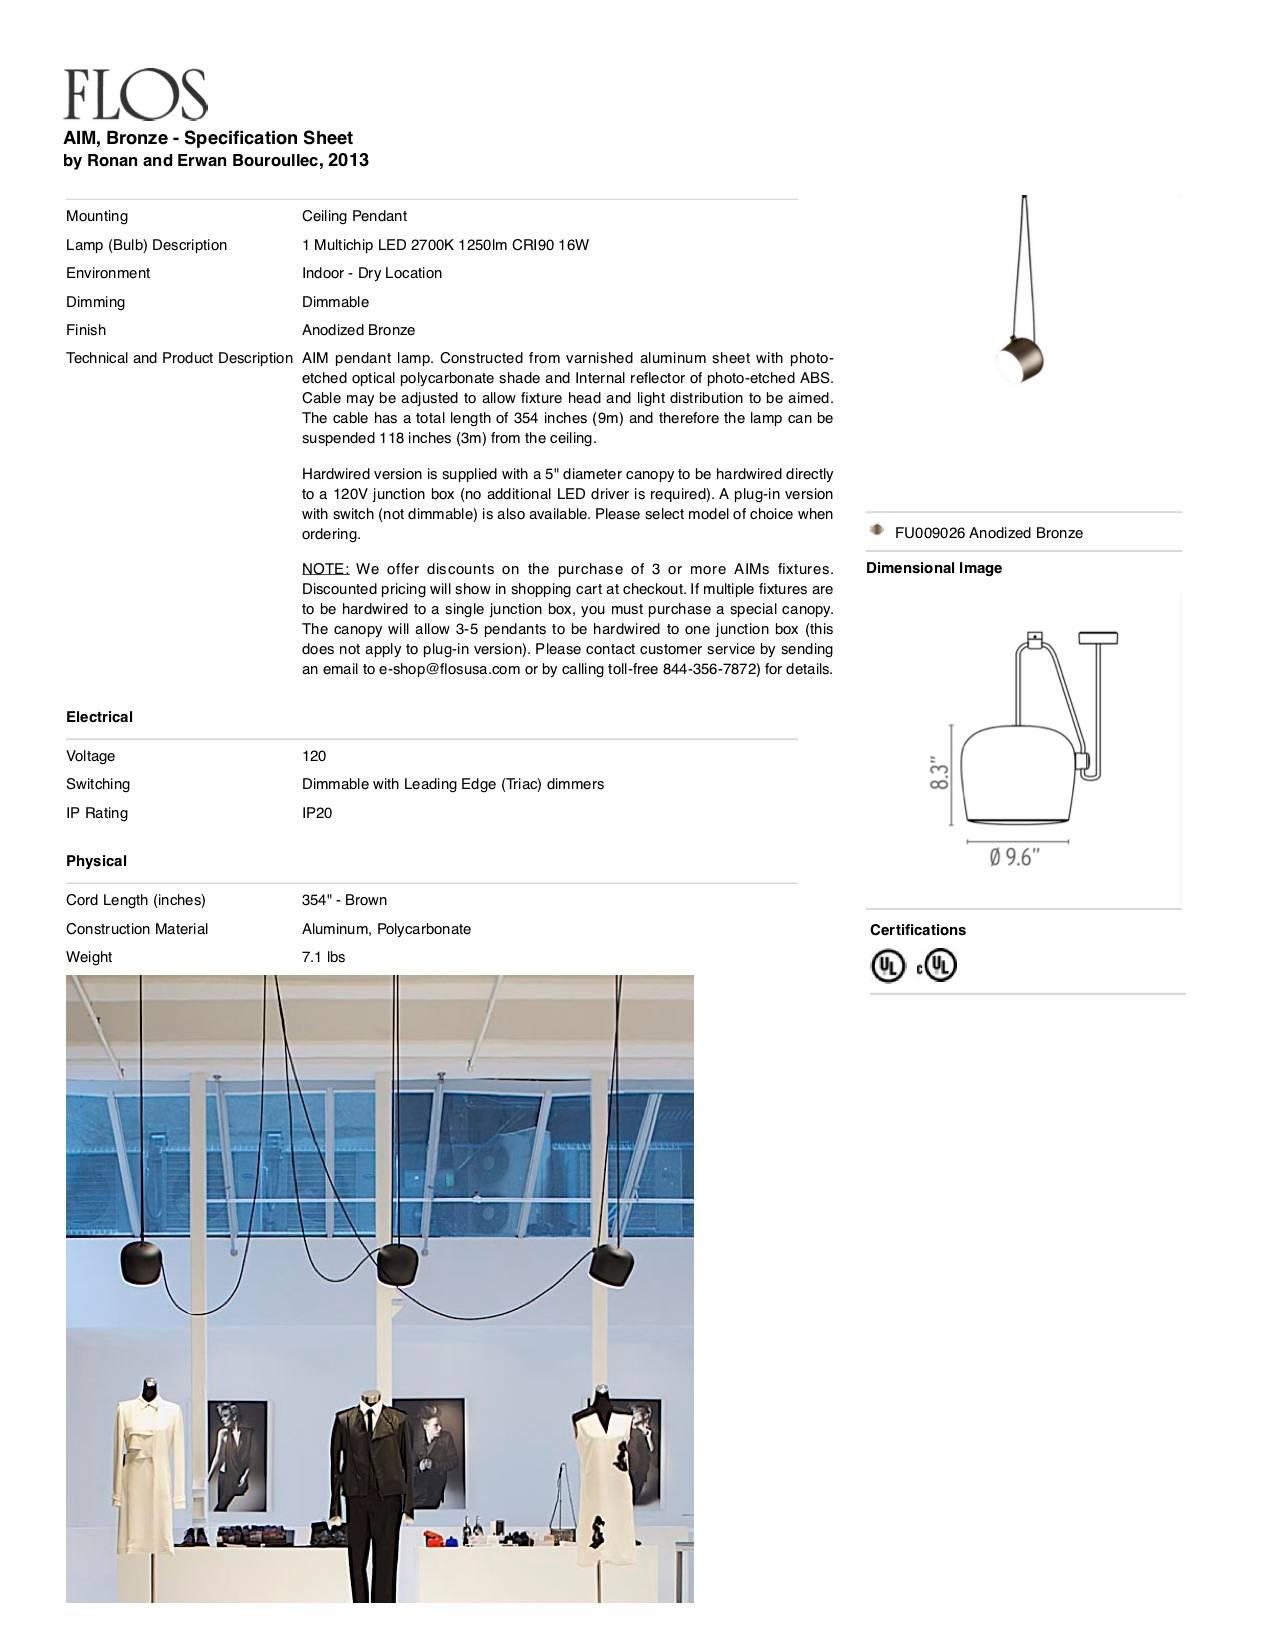 Contemporary Bouroullec Modern Bronze Hanging Aim Pendant Light for FLOS, in stock